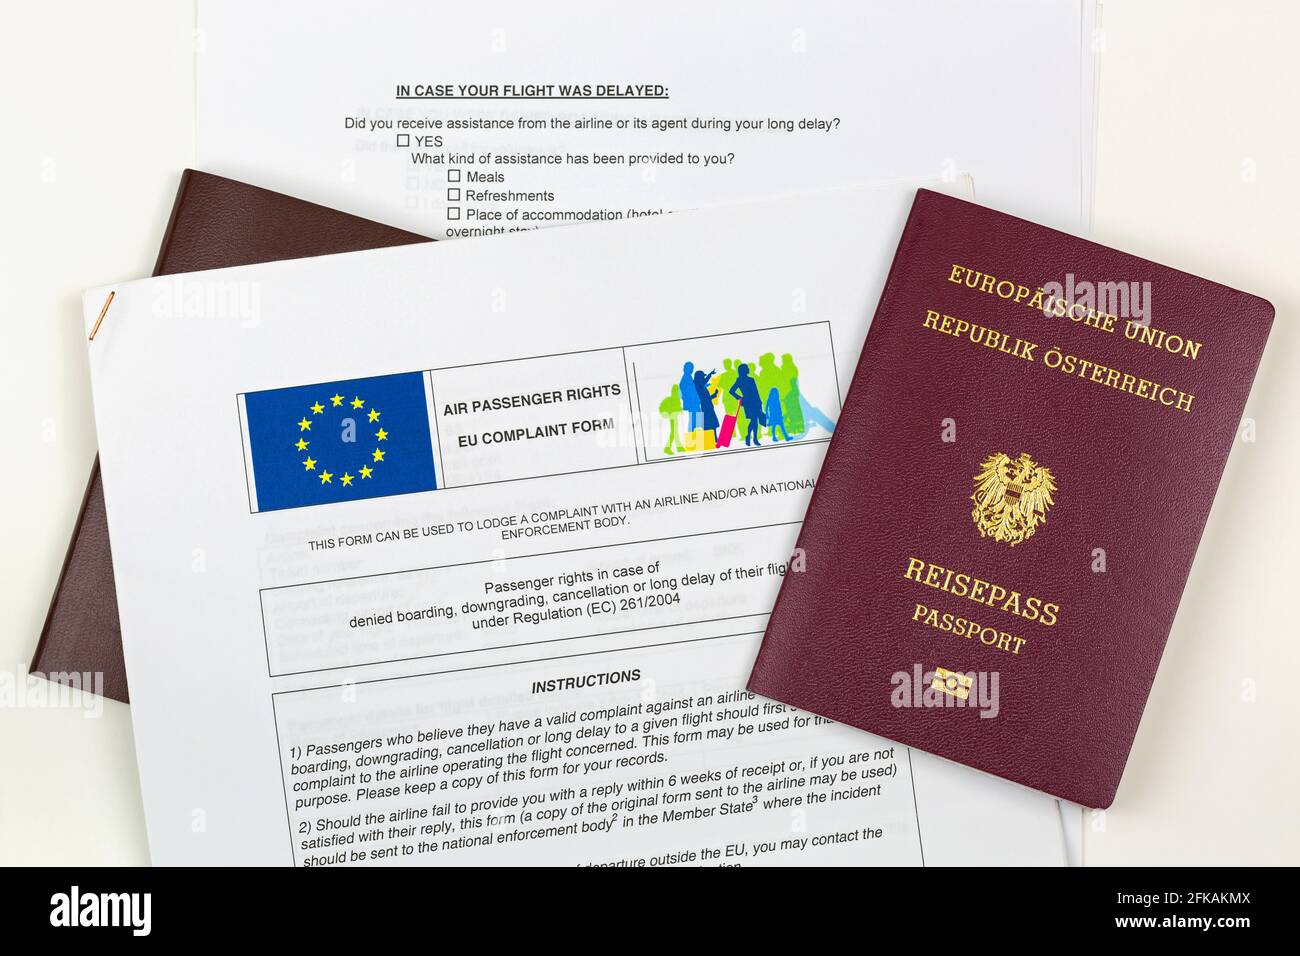 MUNICH, GERMANY - OCTOBER 2016 : Austrian electronic passport on EU complaint form at Munich airport, Germany on October 23, 2016. Passengers can comp Stock Photo